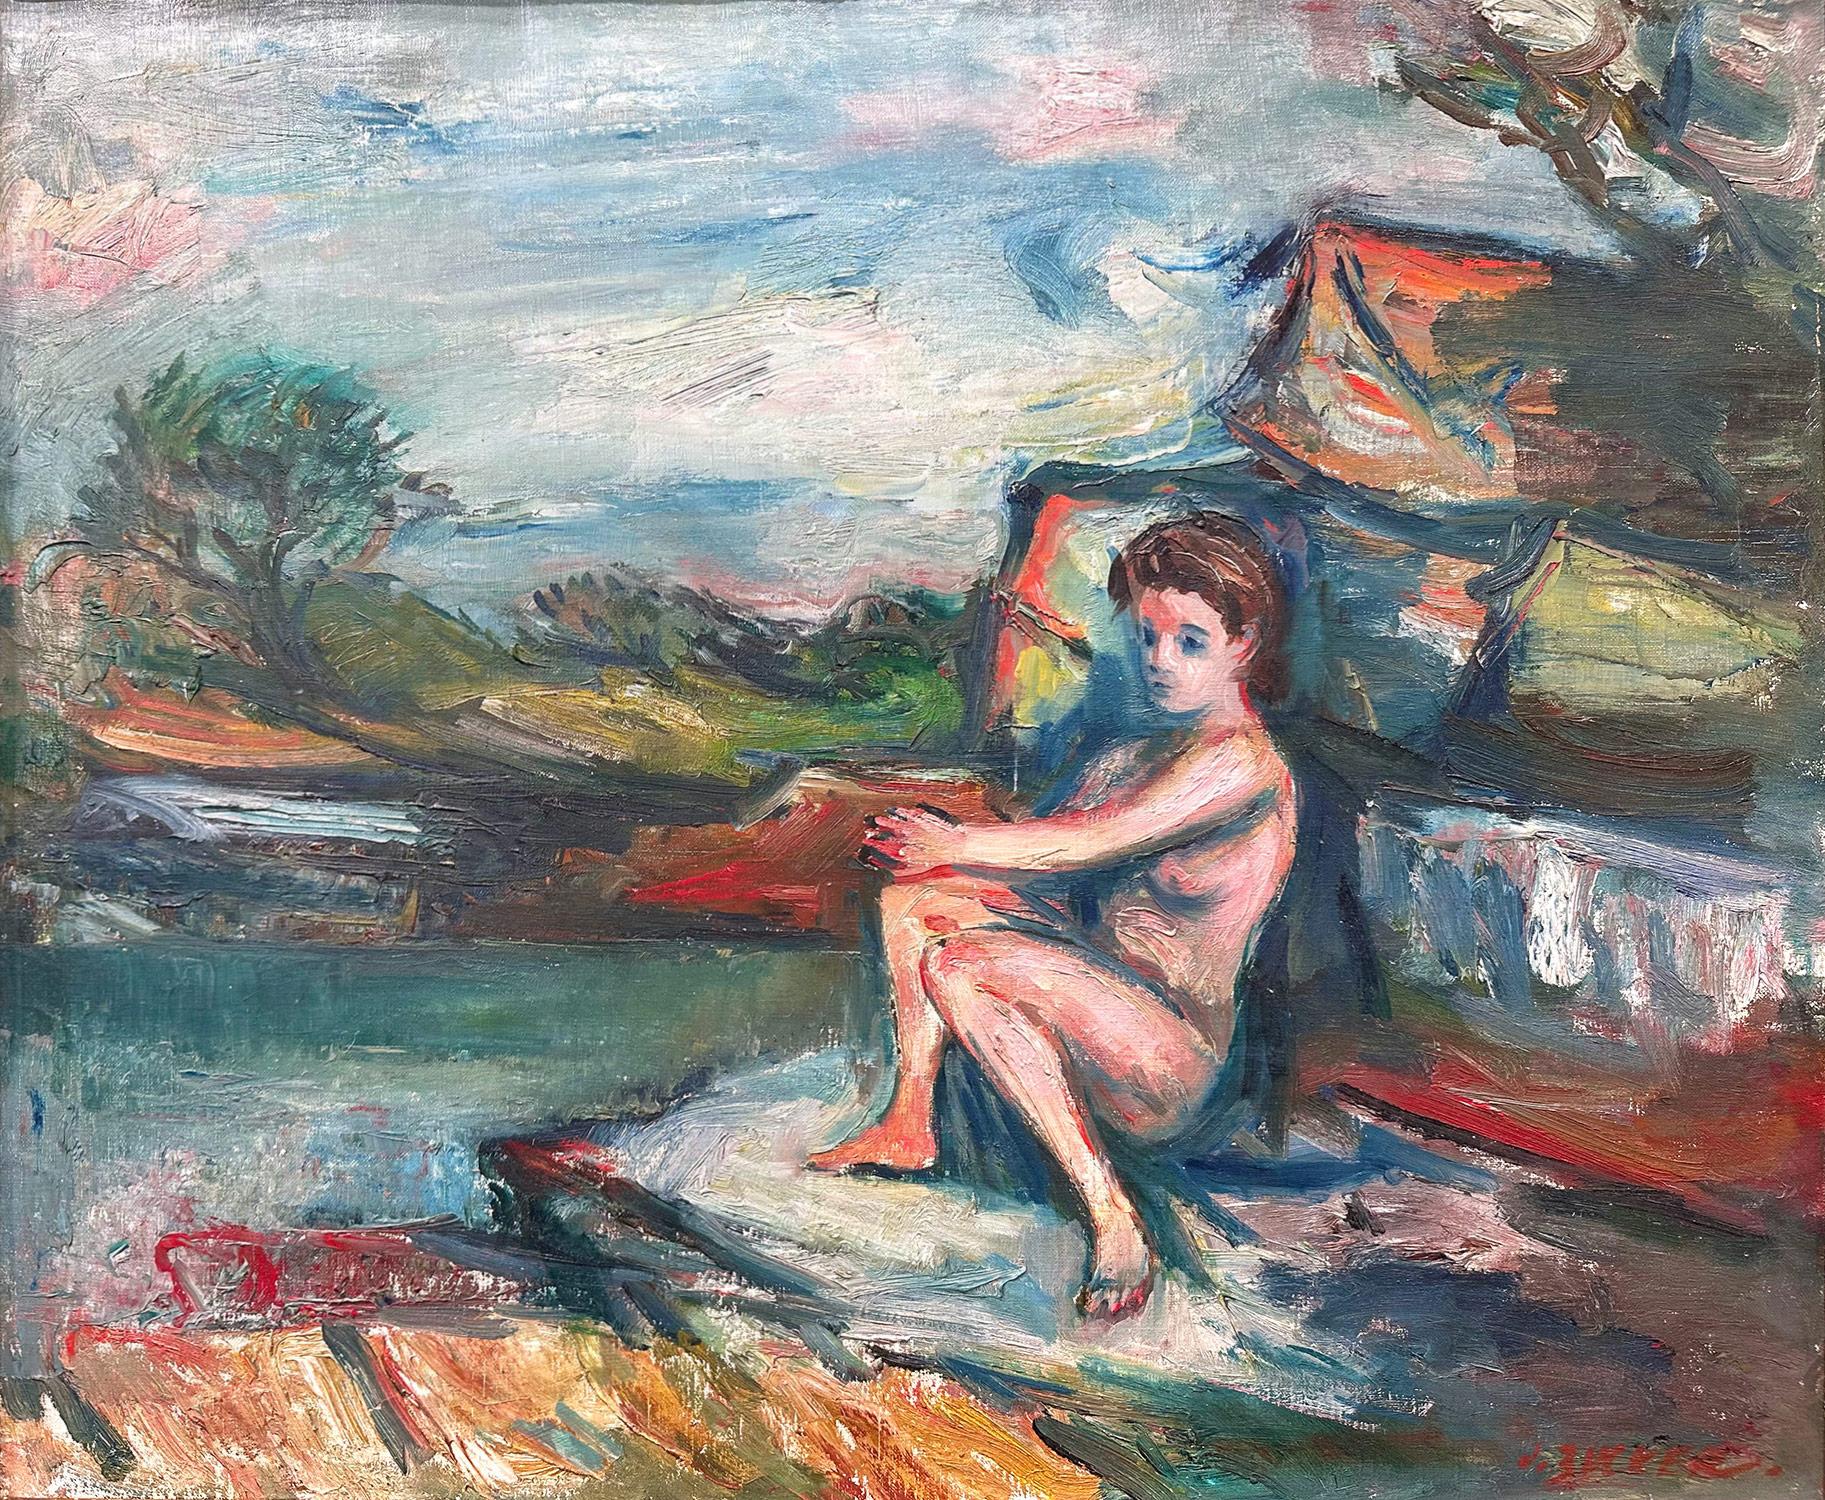 This painting depicts a whimsical scene of a nude sun bather resting by the lake with the trees and vegetation on the background. The bright colors and quick brush strokes are what makes this painting so attractive and desirable. The piece is done